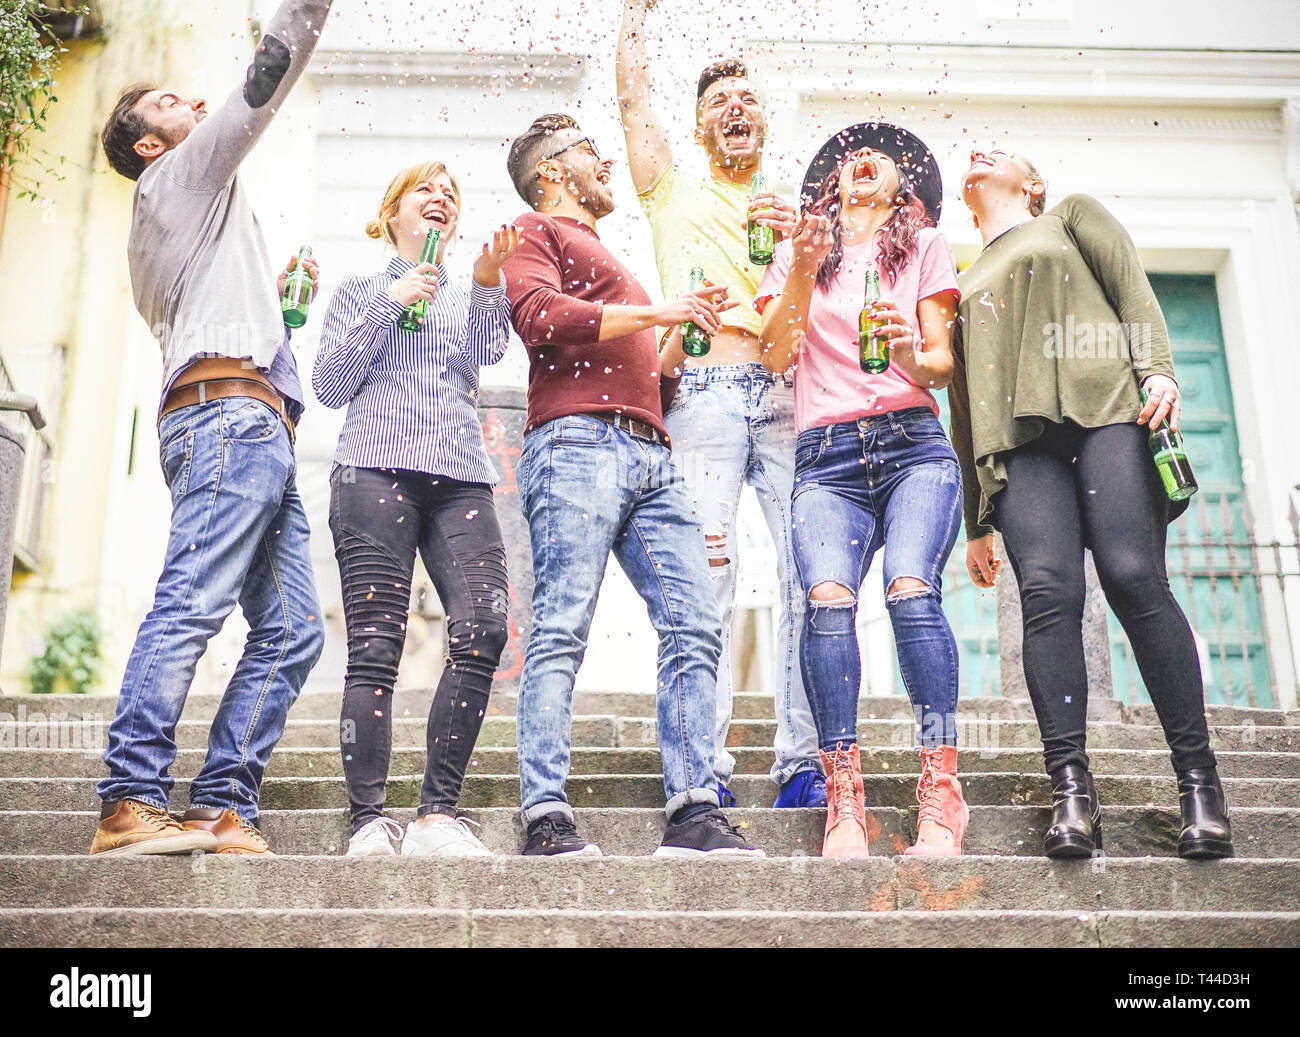 Group of happy friends celebrating together throwing up confetti and drinking beers - Young people having a party on stairs of an urban area Stock Photo